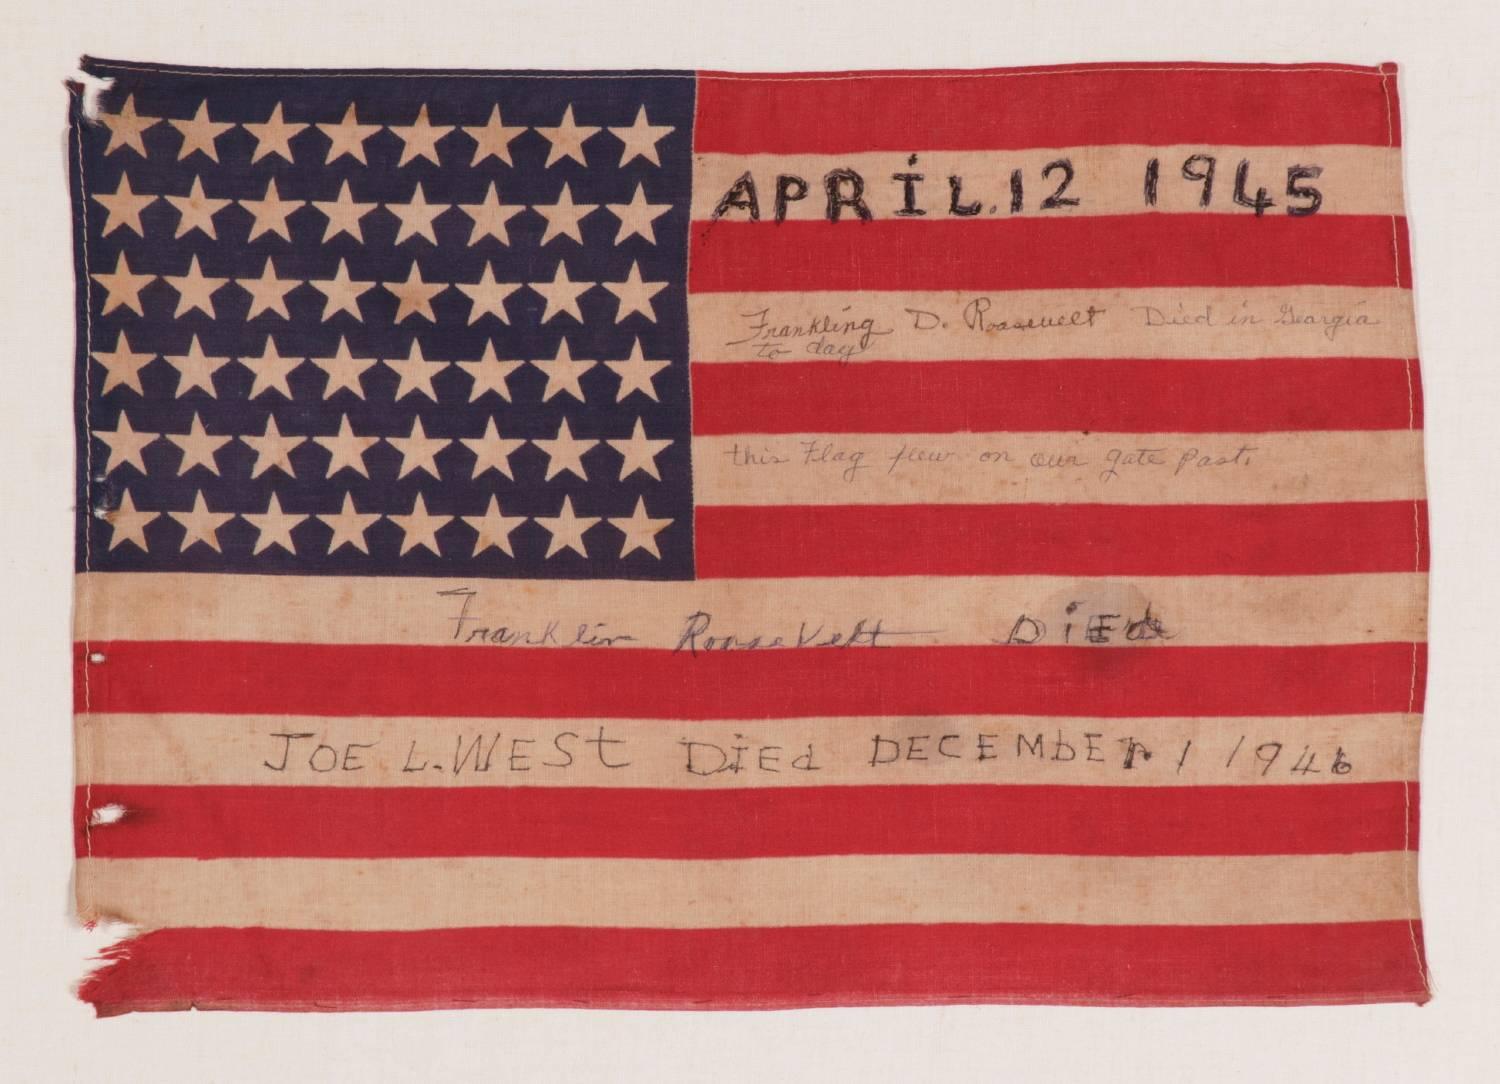 48 STARS ON ANTIQUE AMERICAN FLAG WITH HAND-WRITTEN INSCRIPTIONS AND AN EMBROIDERED DATE OF APRIL 12TH, 1945, MOURNING THE DEATH OF PRESIDENT FRANKLIN DELANO ROOSEVELT:

 American national parade flag with 48 stars, printed on cotton, embellished